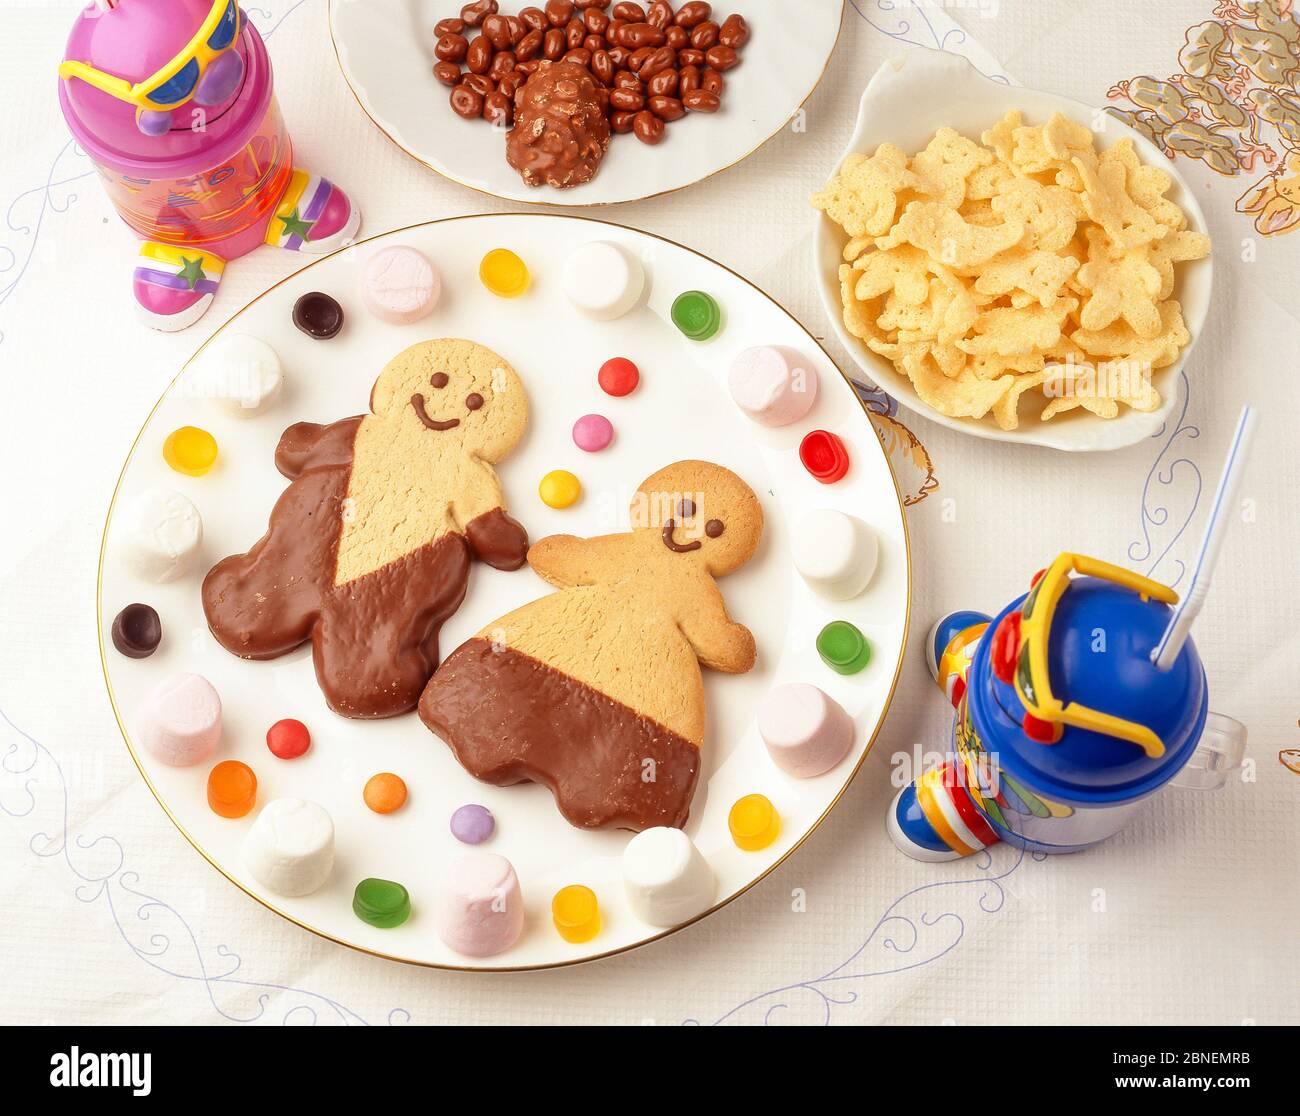 Children's party plate with gingerbread characters, sweets and crisps, Winkfield, Berkshire, England, United Kingdom Stock Photo